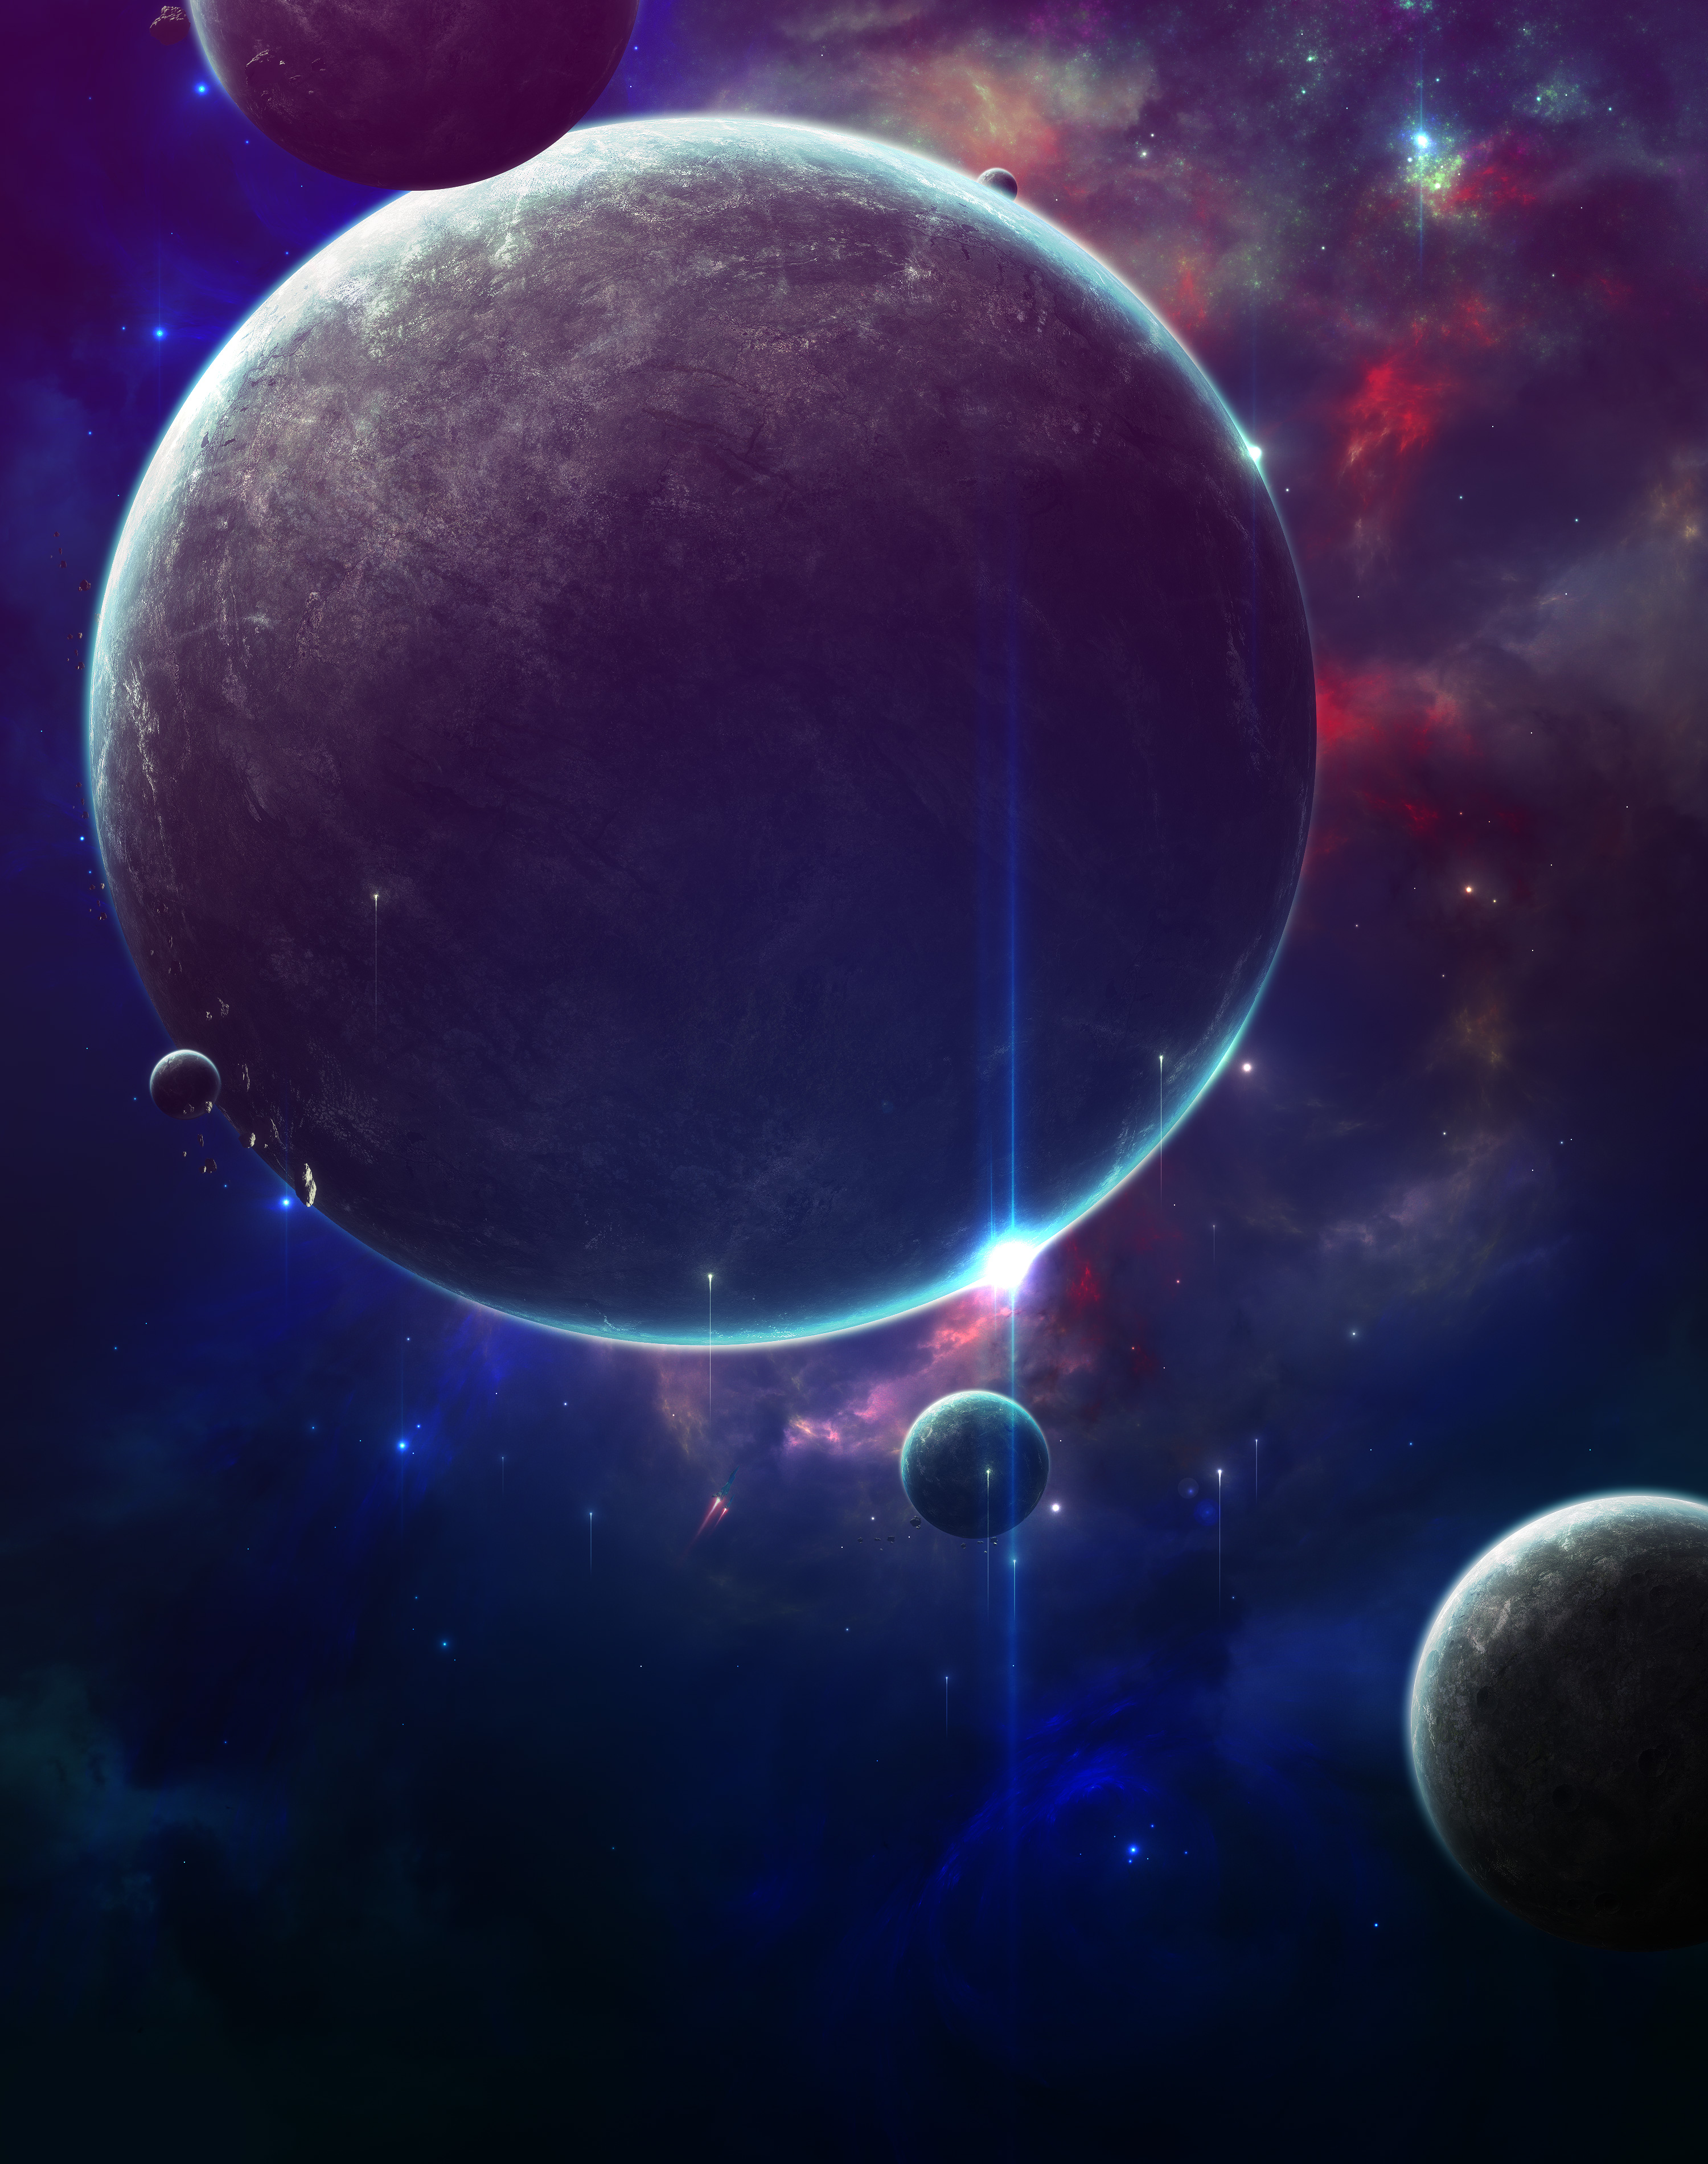 flash, shining, planets, universe cell phone wallpapers